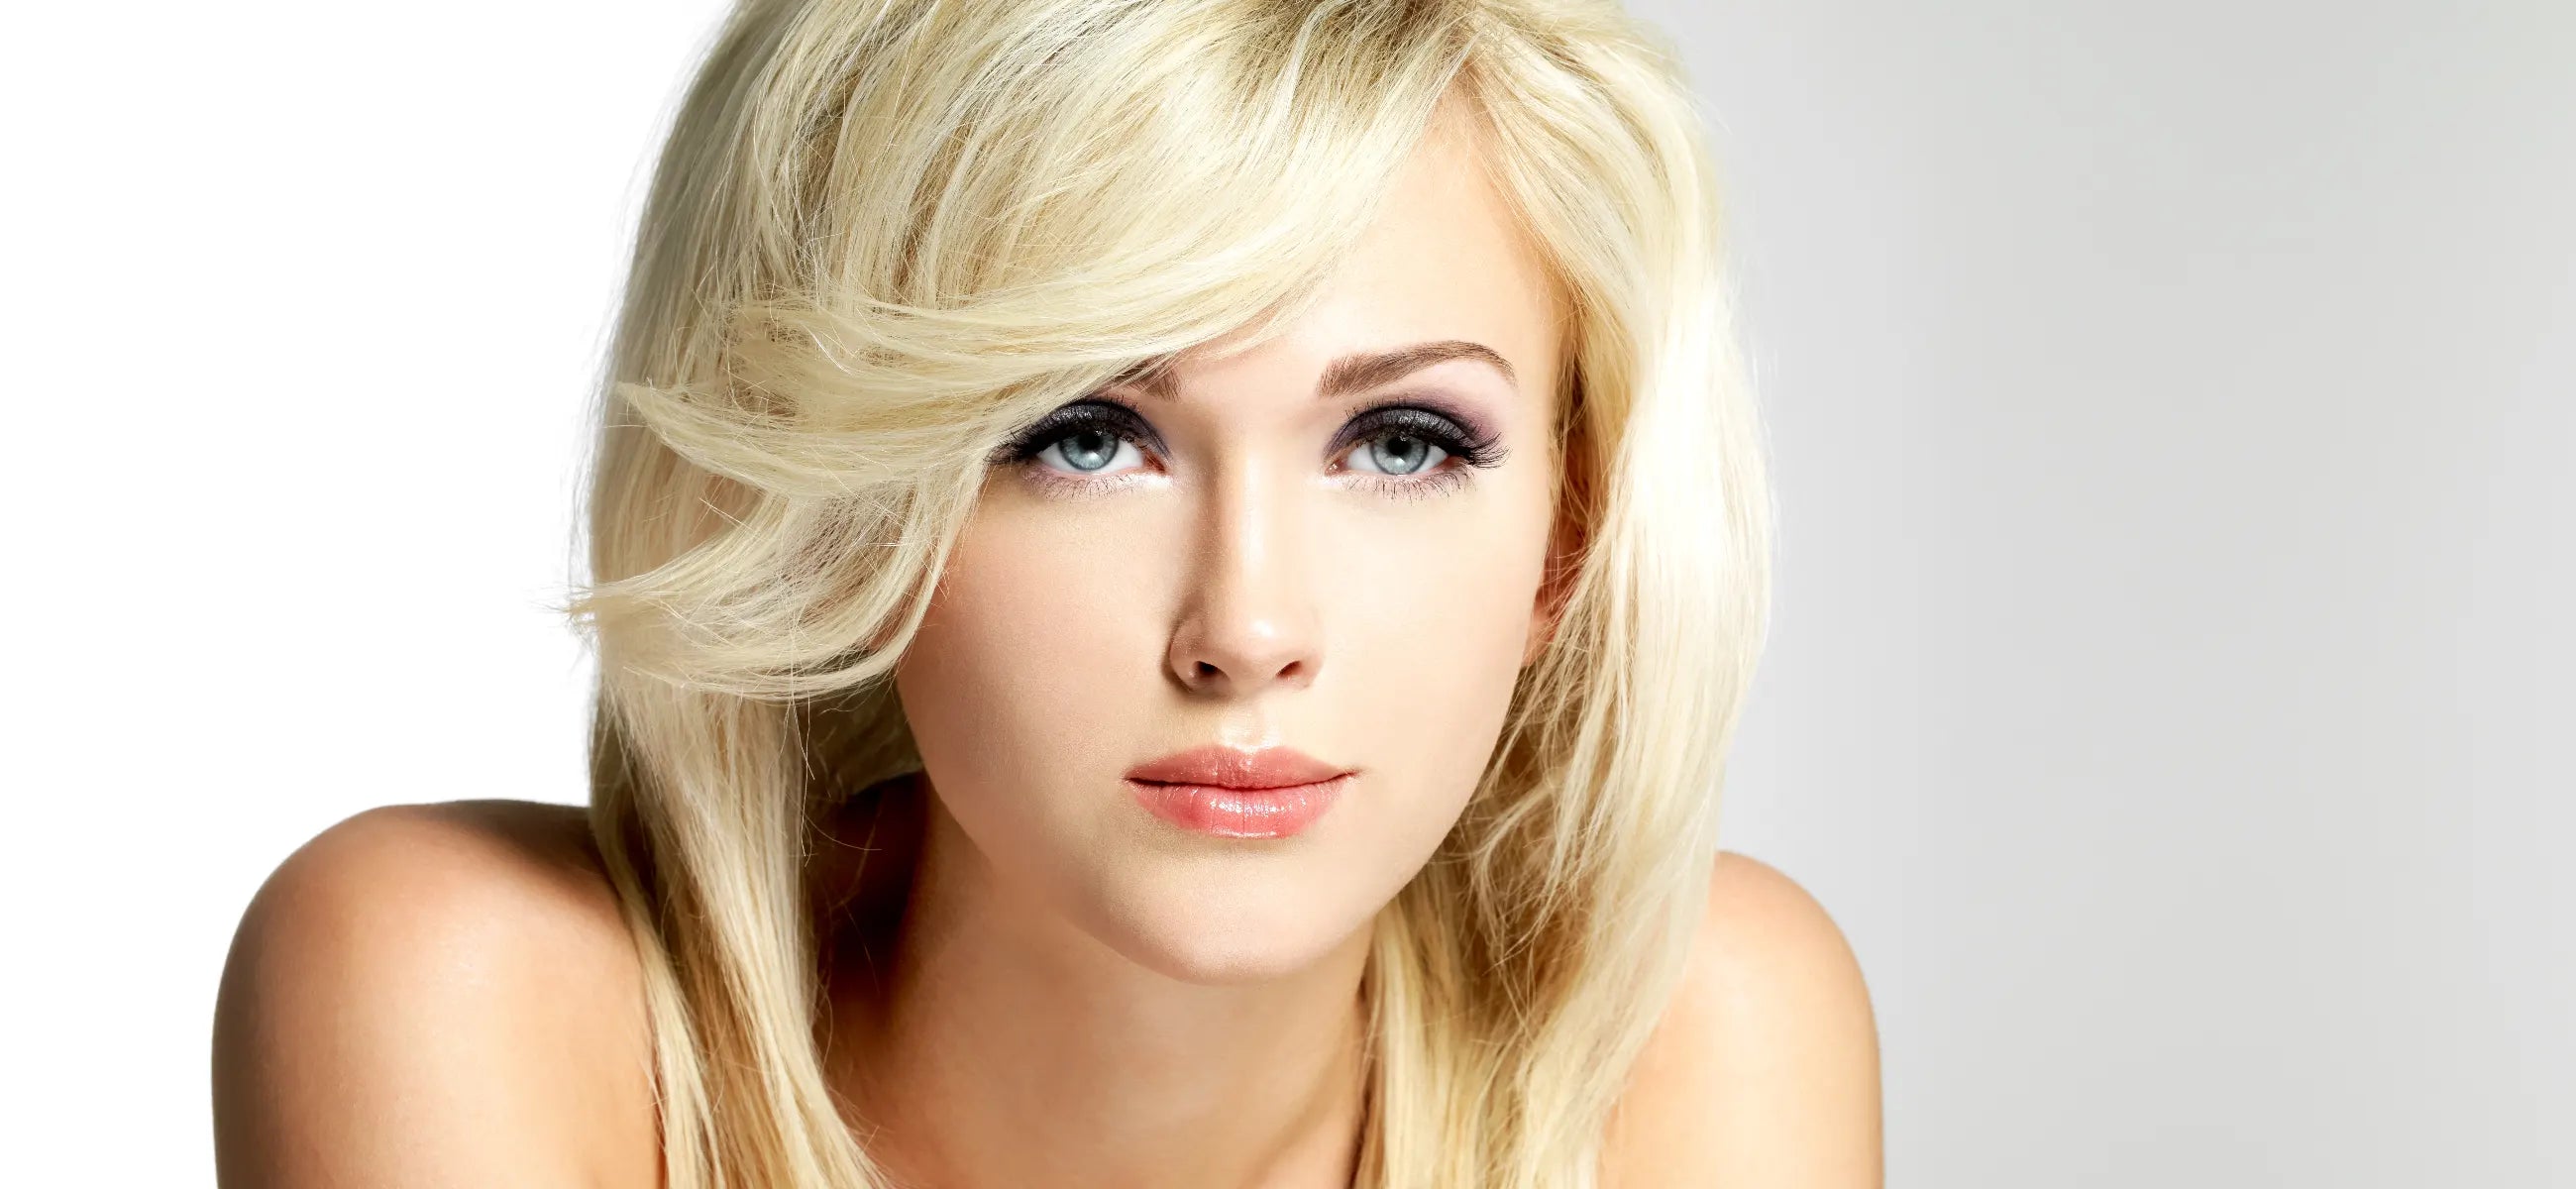 Blonde ambition: 8 stunning blonde hair ideas for any occasion